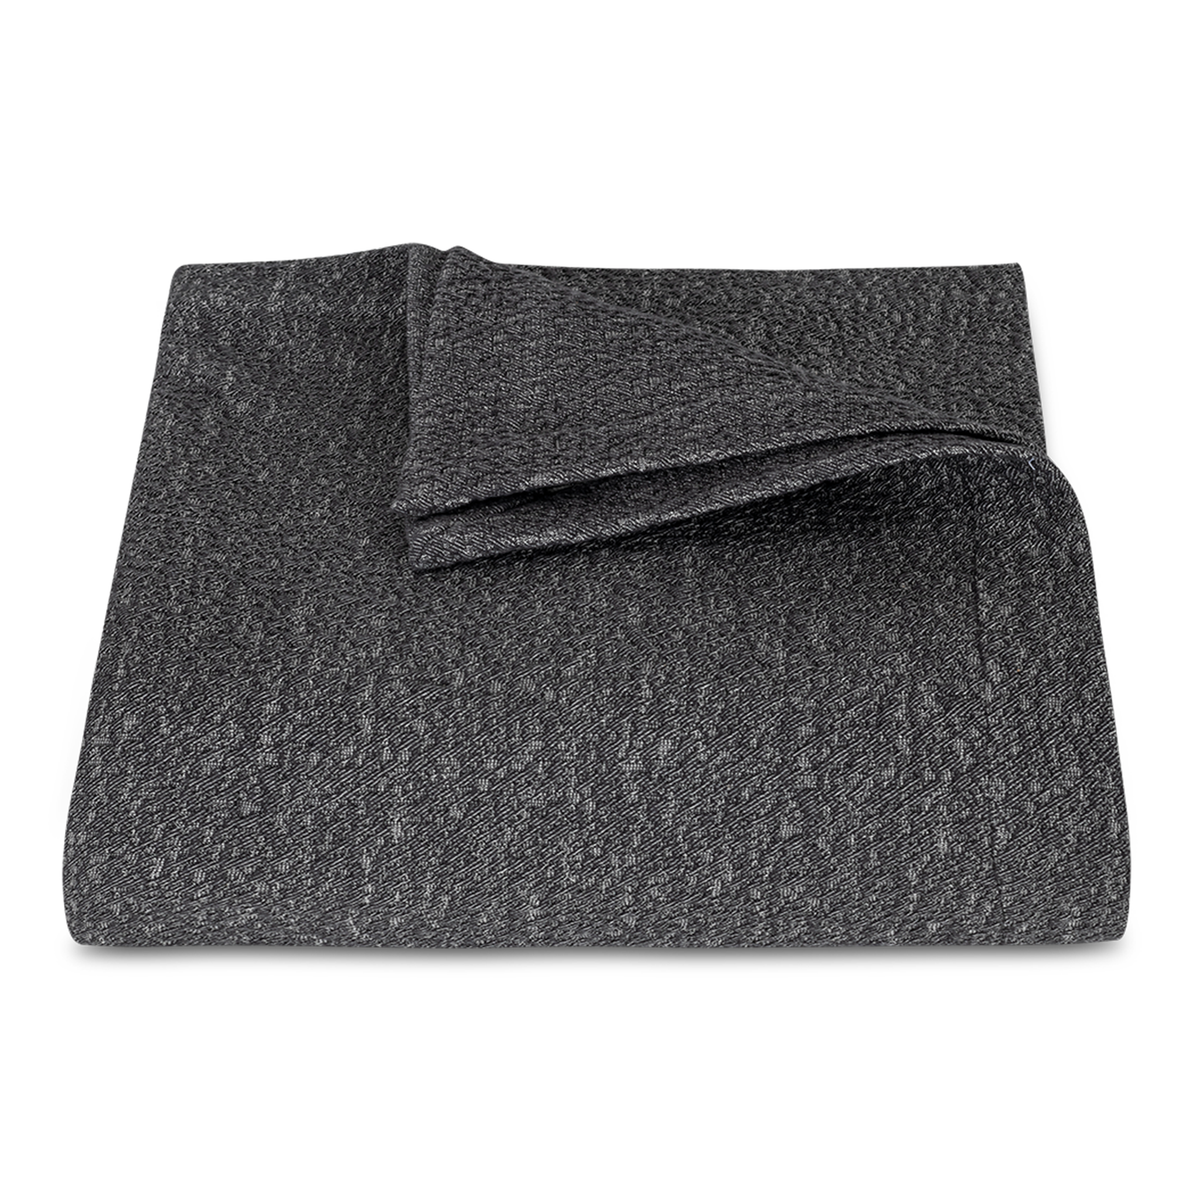 Folded Coverlet of Matouk Malibu Bedding in Color Charcoal